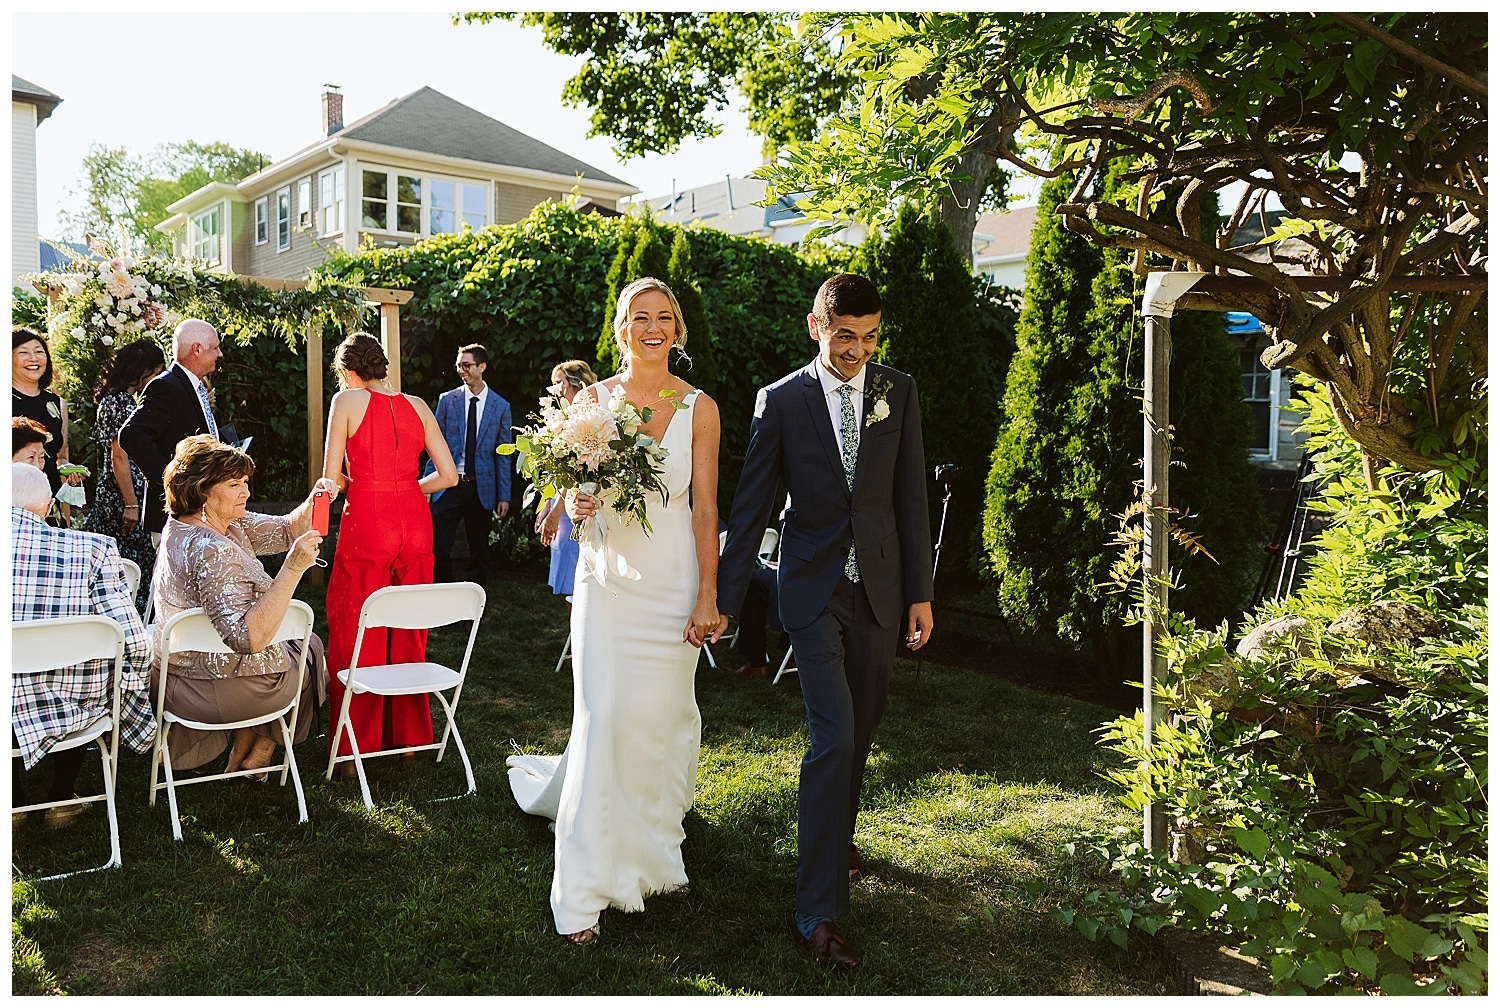 wedding recessional at microwedding in Watertown, Massachusetts